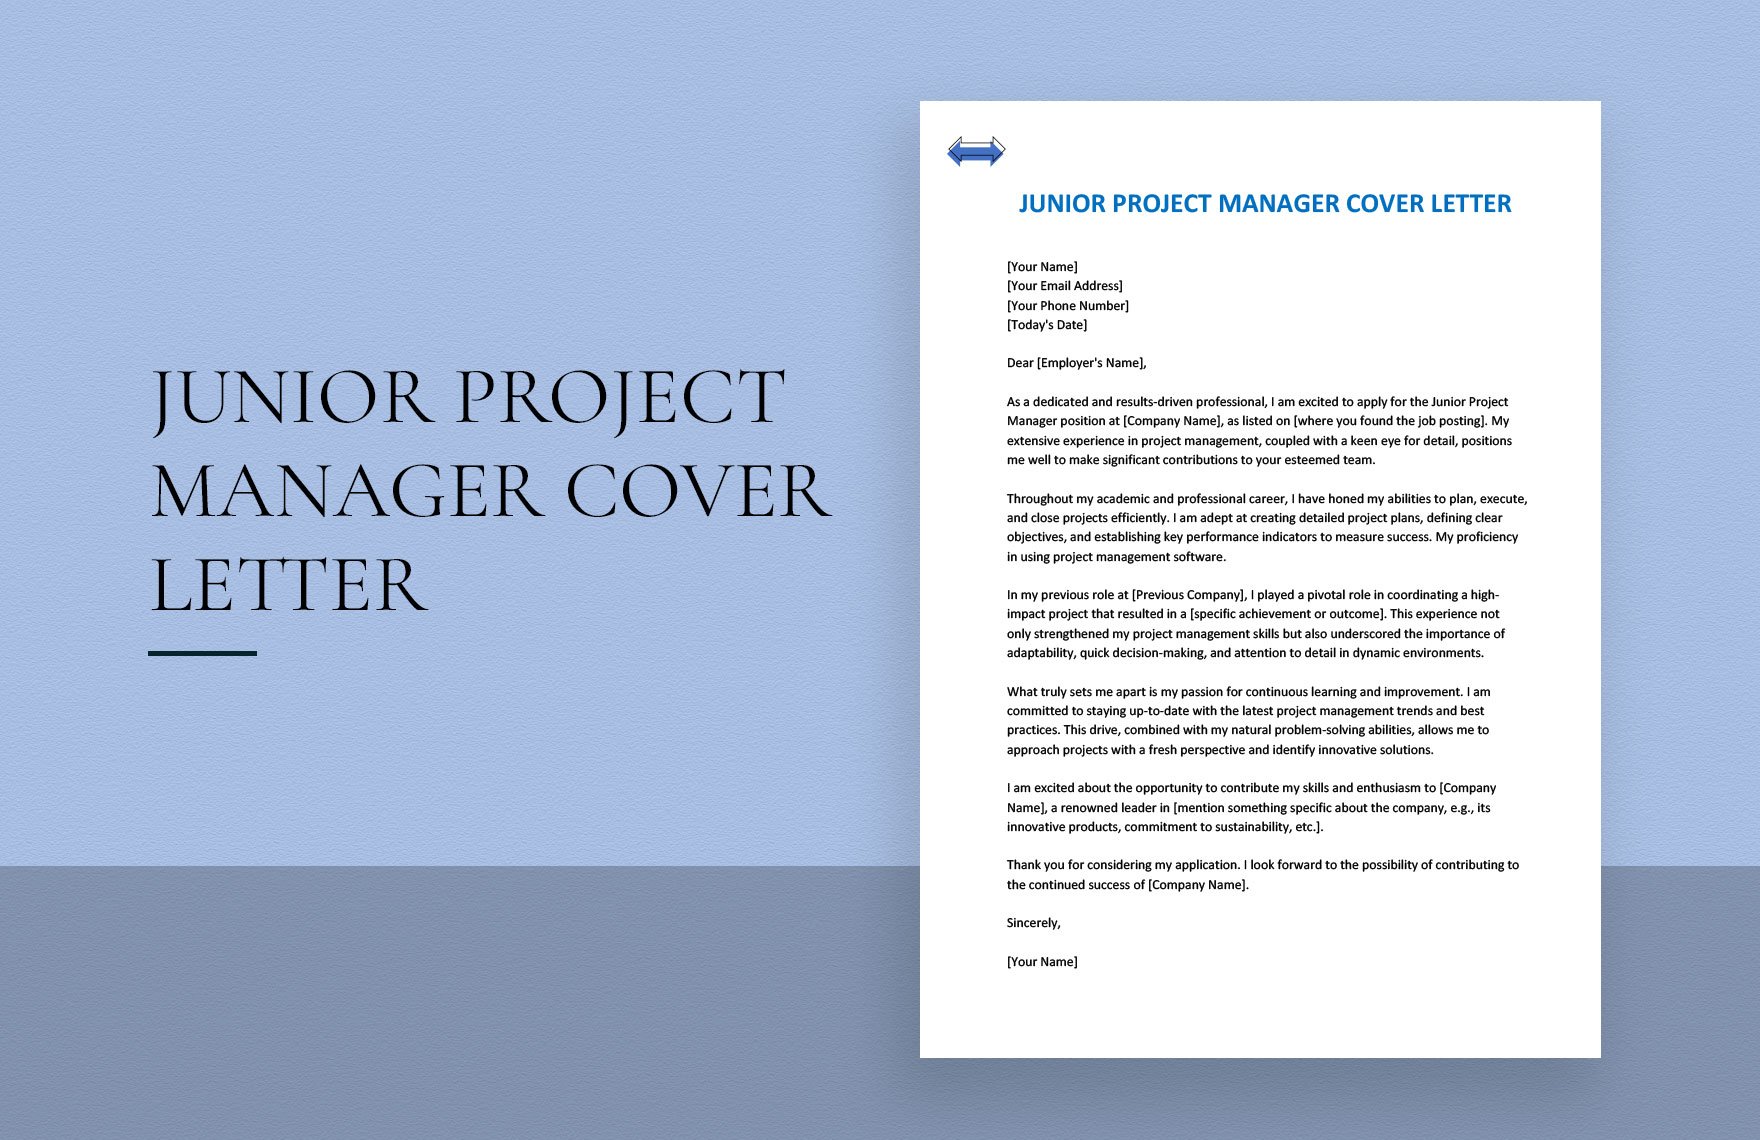 Junior Project Manager Cover Letter